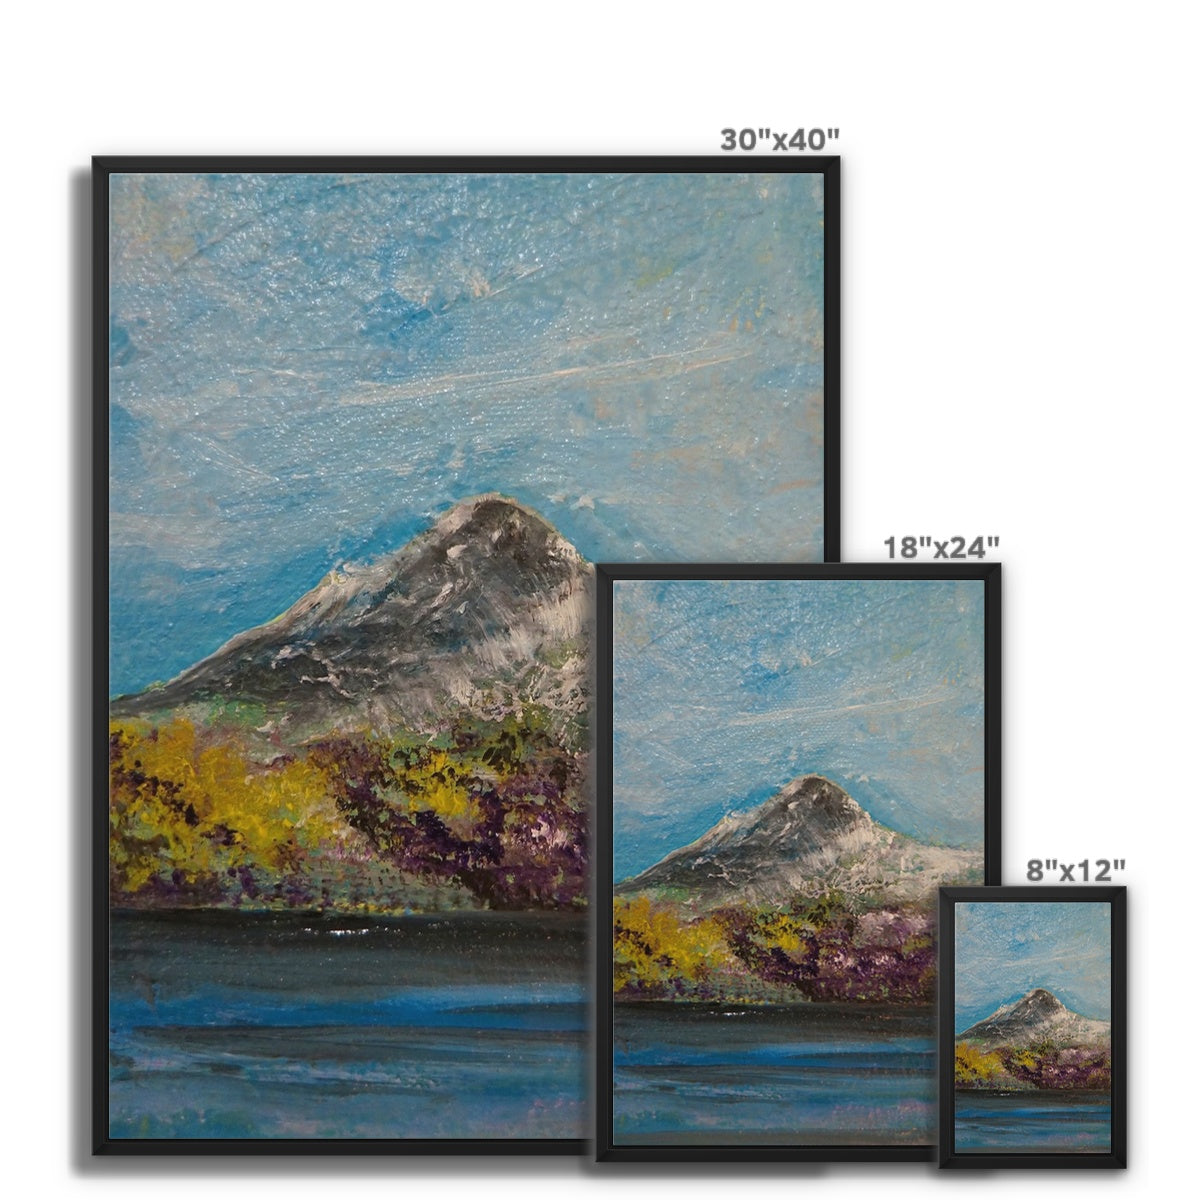 Ben Lomond ii Painting | Framed Canvas From Scotland-Floating Framed Canvas Prints-Scottish Lochs & Mountains Art Gallery-Paintings, Prints, Homeware, Art Gifts From Scotland By Scottish Artist Kevin Hunter